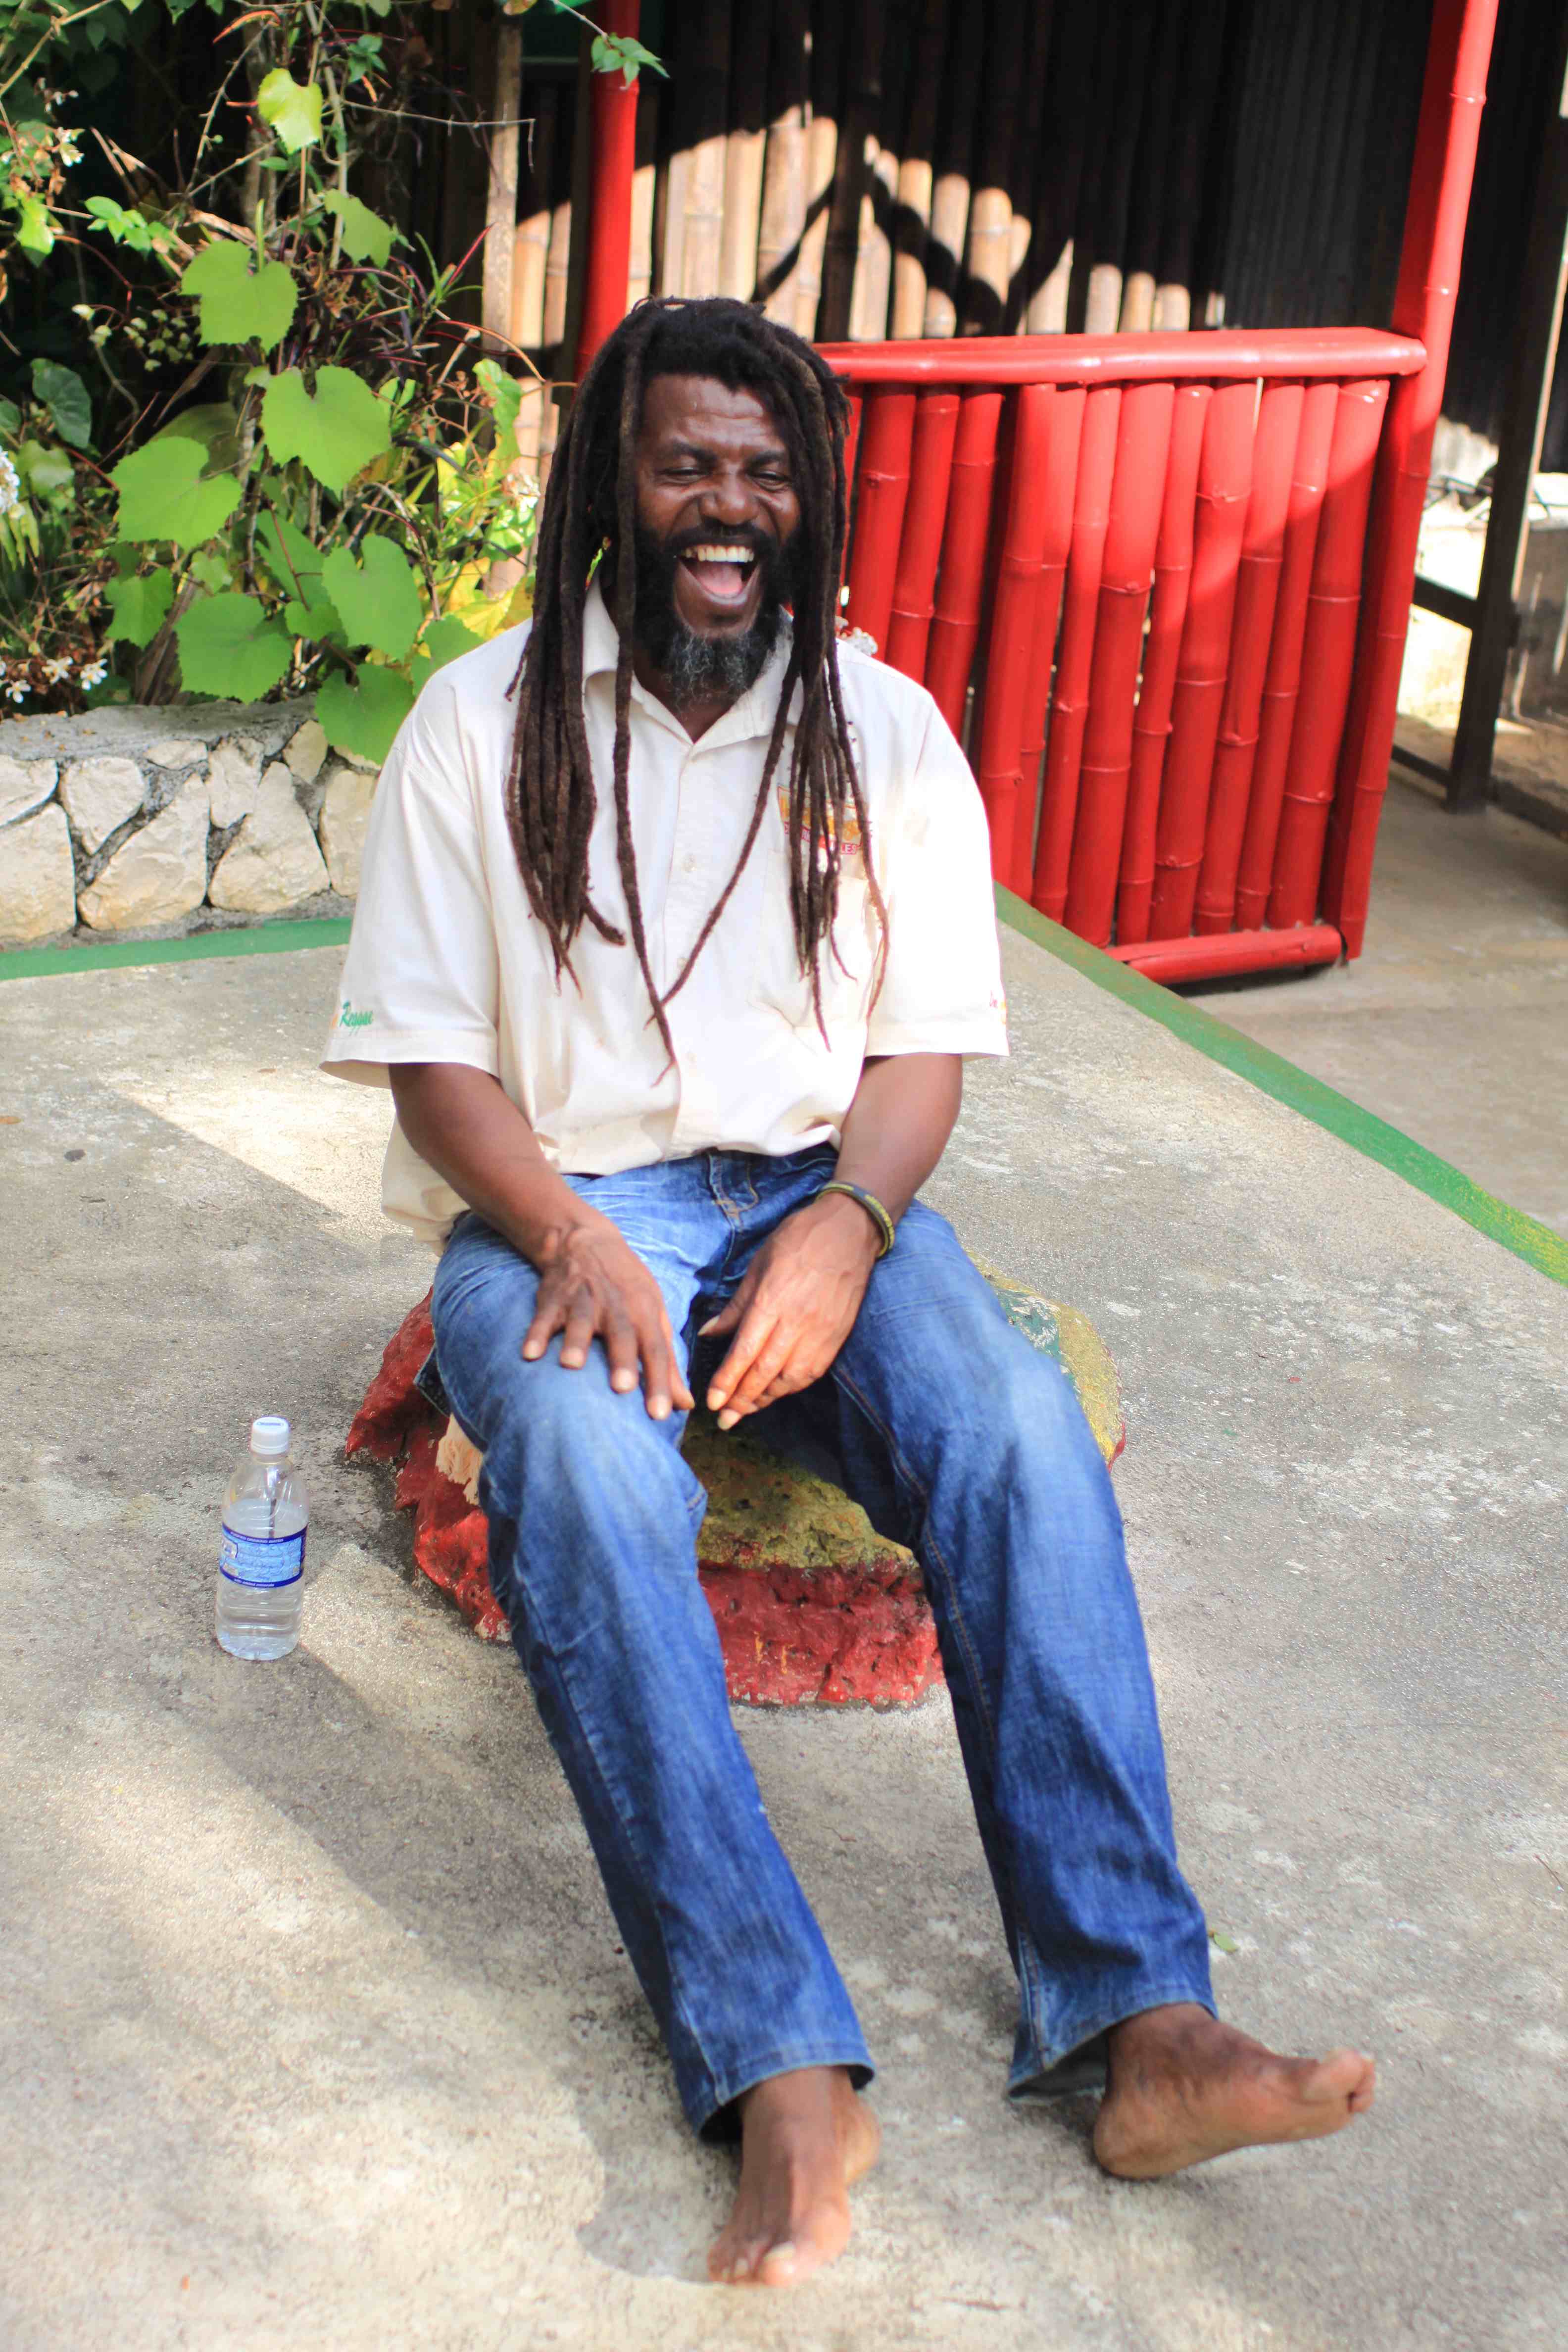 Meeting the YouTube Sensation Captain Crazy at 9 Mile, Jamaica | HuffPost3168 x 4752